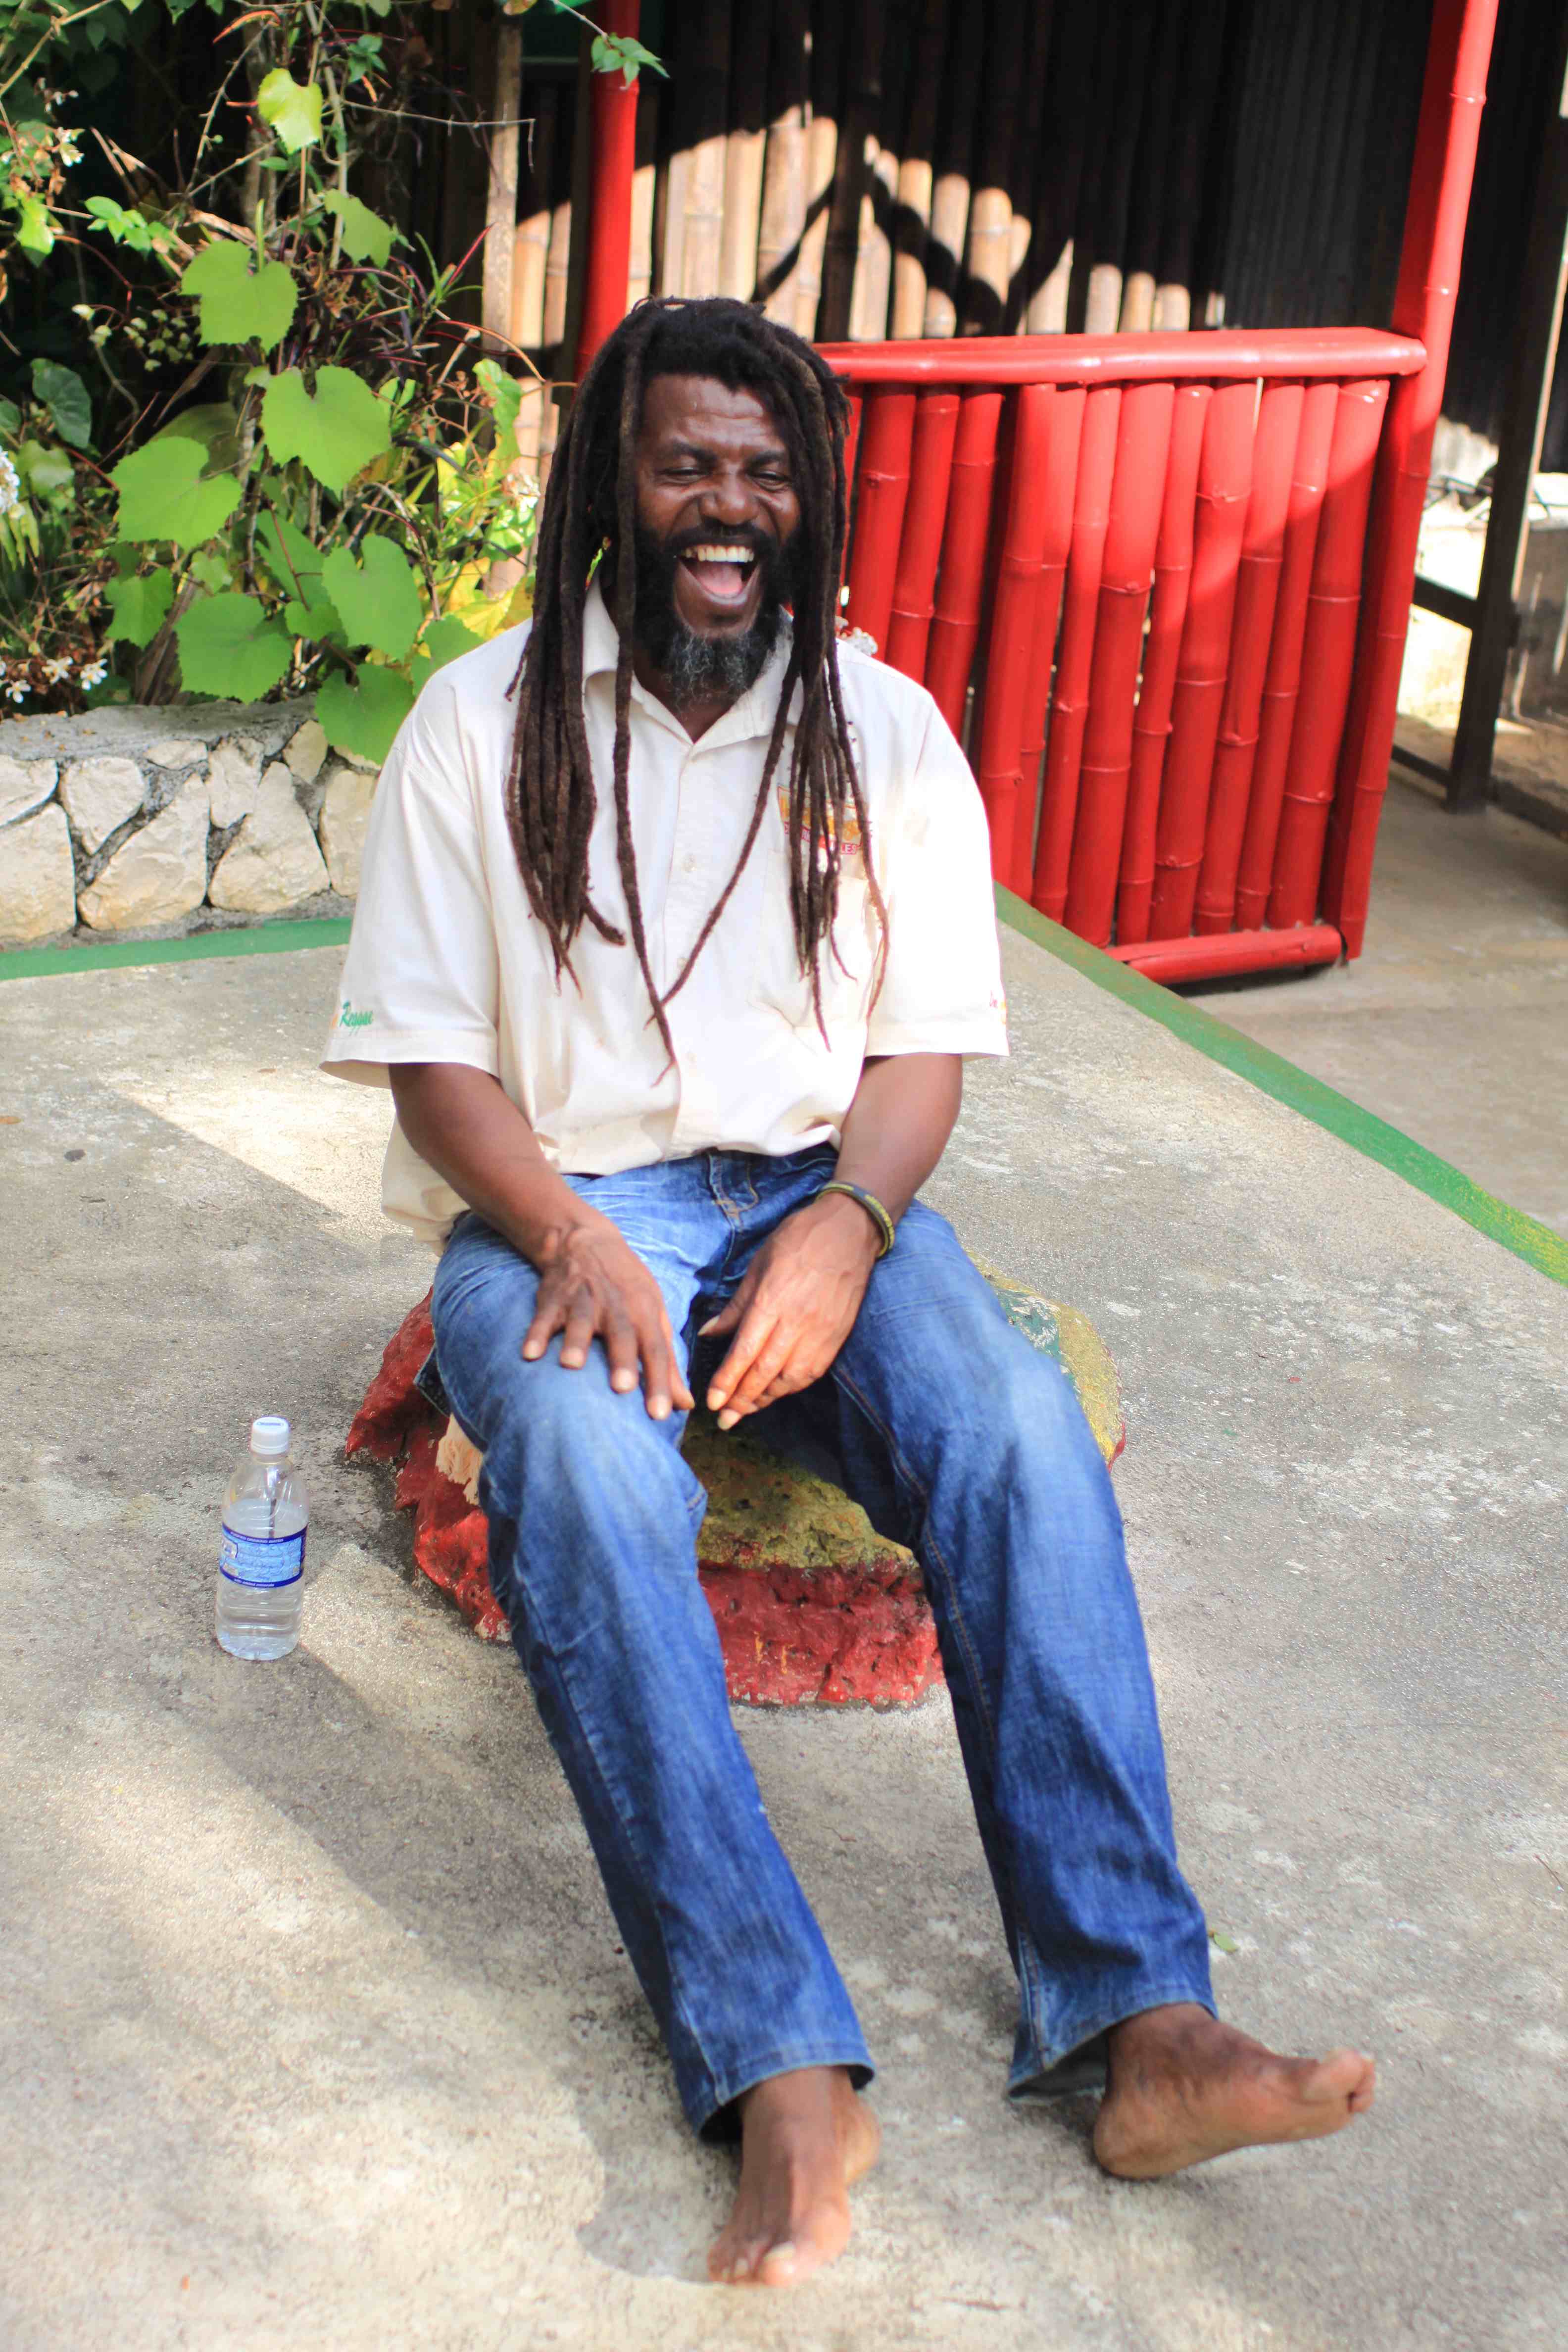 Meeting the YouTube Sensation Captain Crazy at 9 Mile, Jamaica | HuffPost3168 x 4752